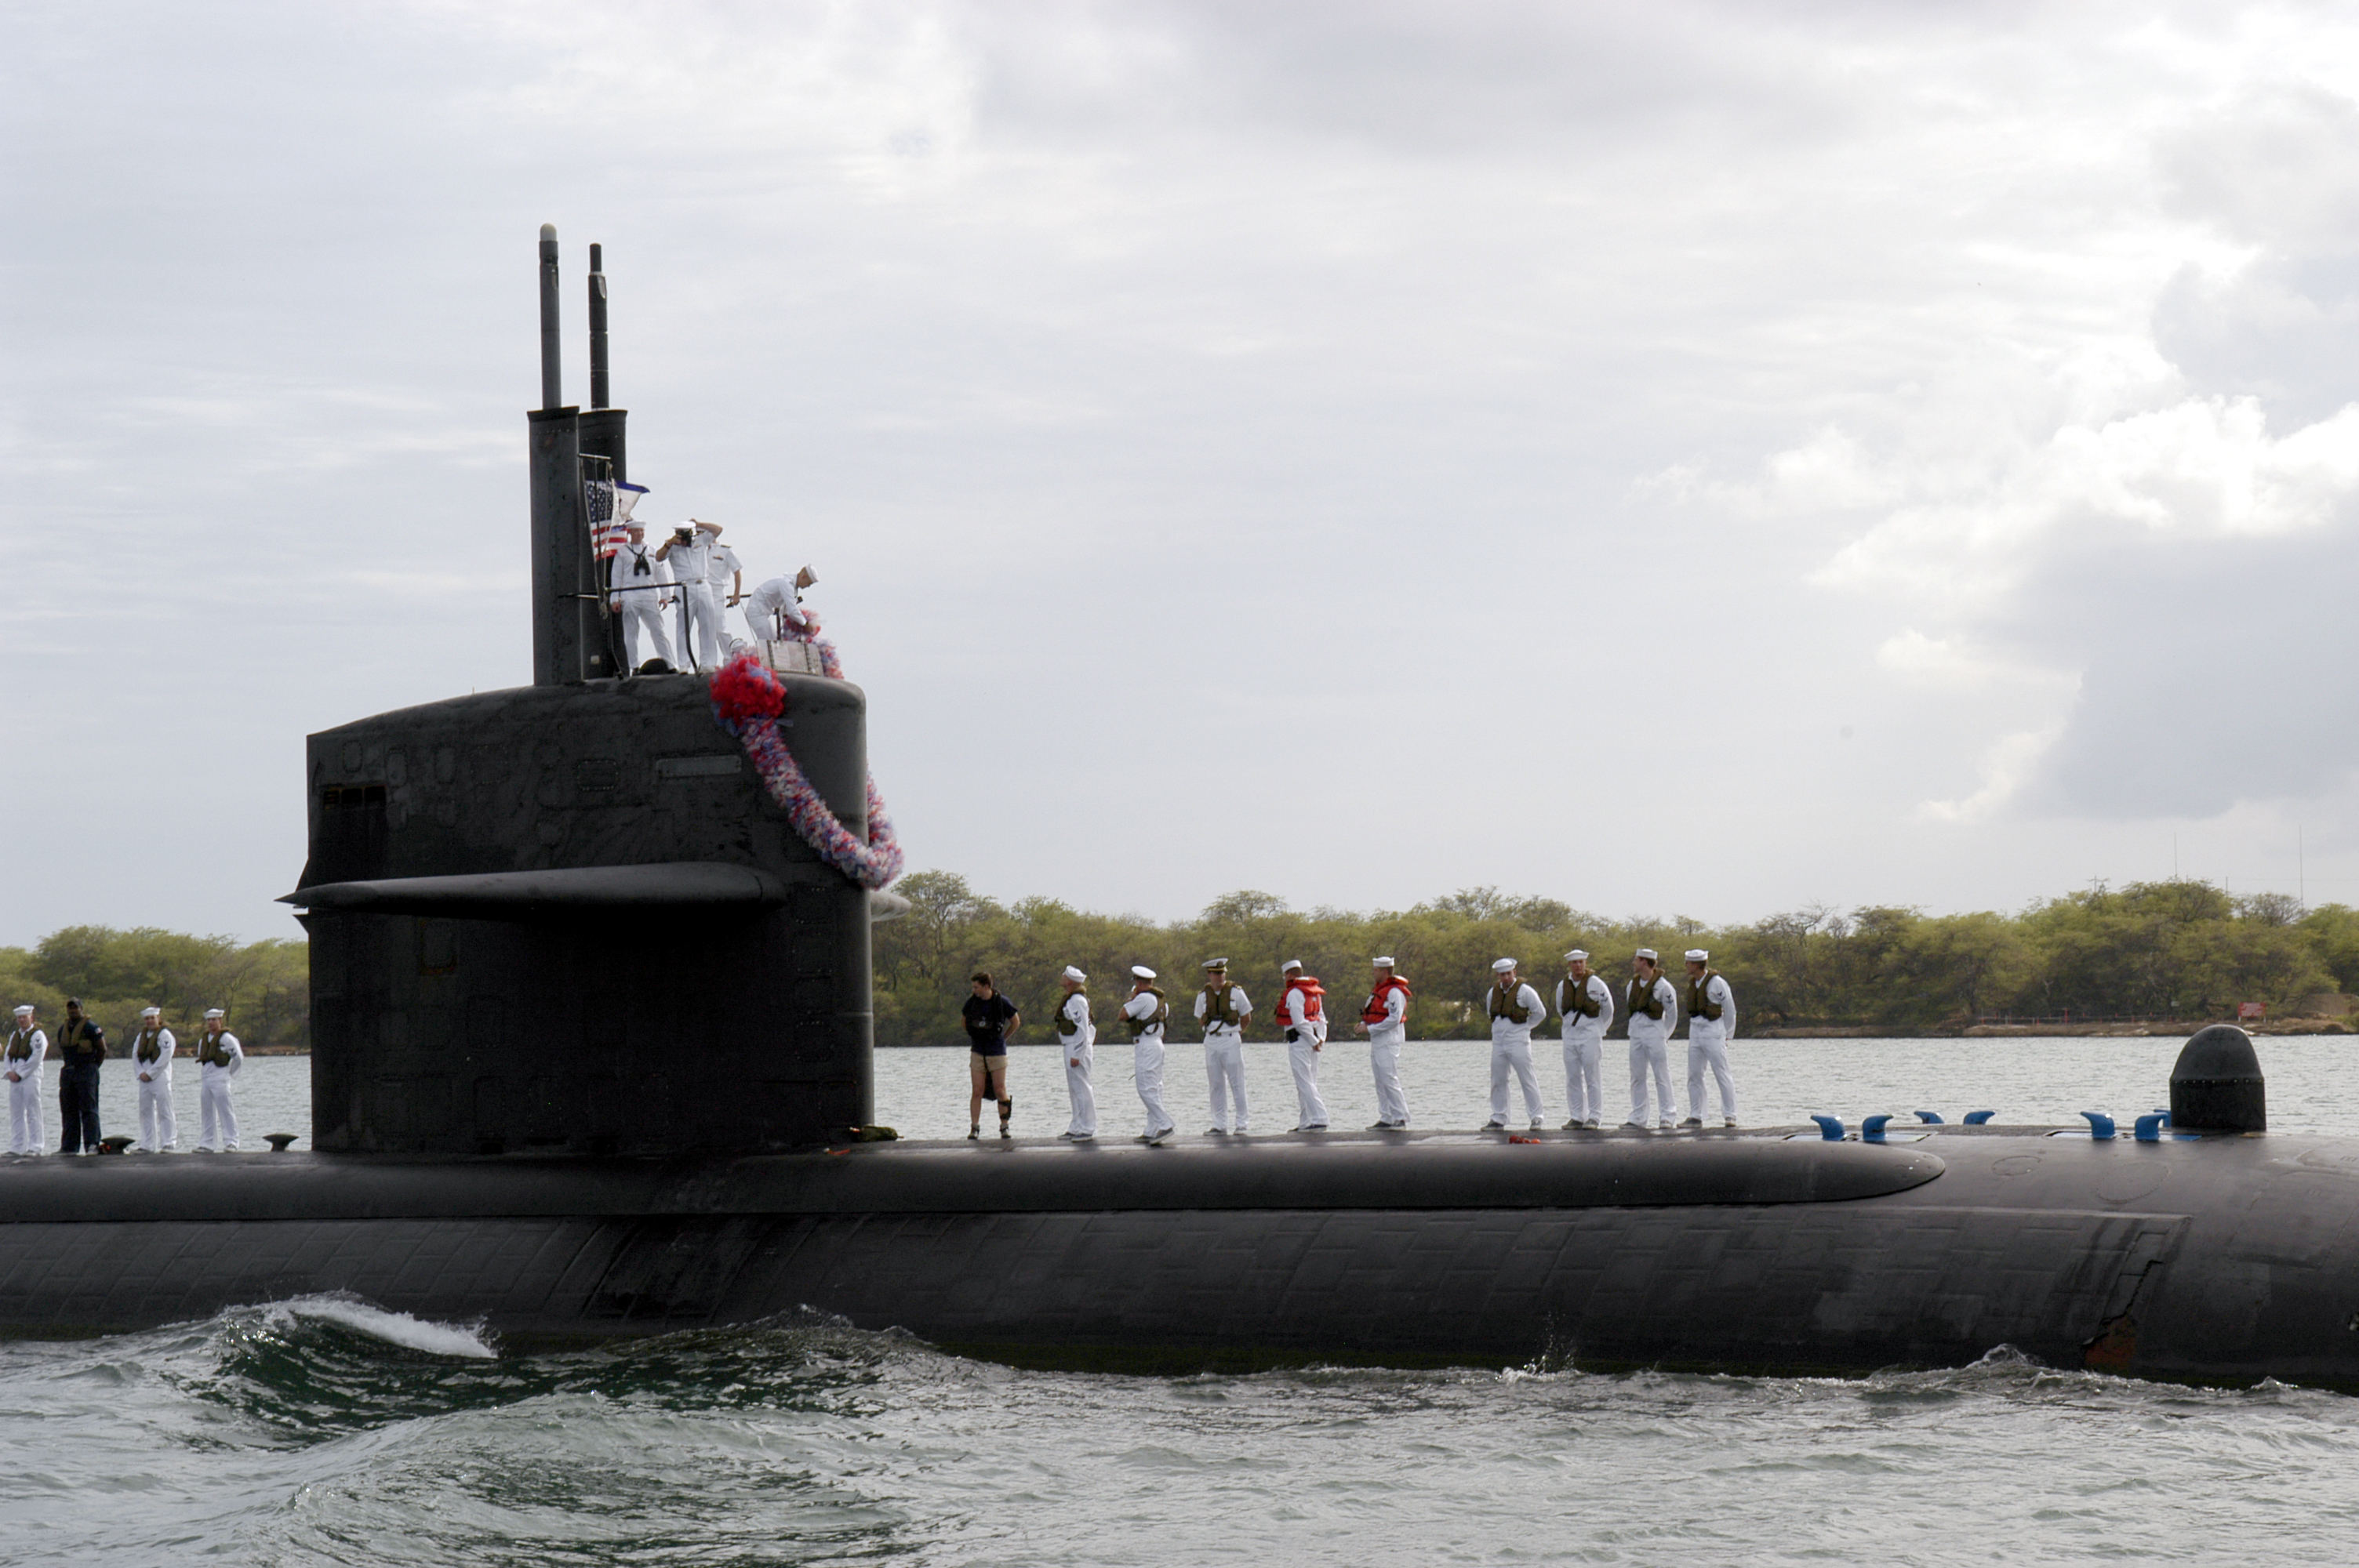 US_Navy_030724-N-8157C-031_The_Los_Angeles_class_attack_submarine_USS_Key_West_%28SSN_722%29_pulls_into_its_homeport_in_Pearl_Harbor%2C_Hawaii.jpg